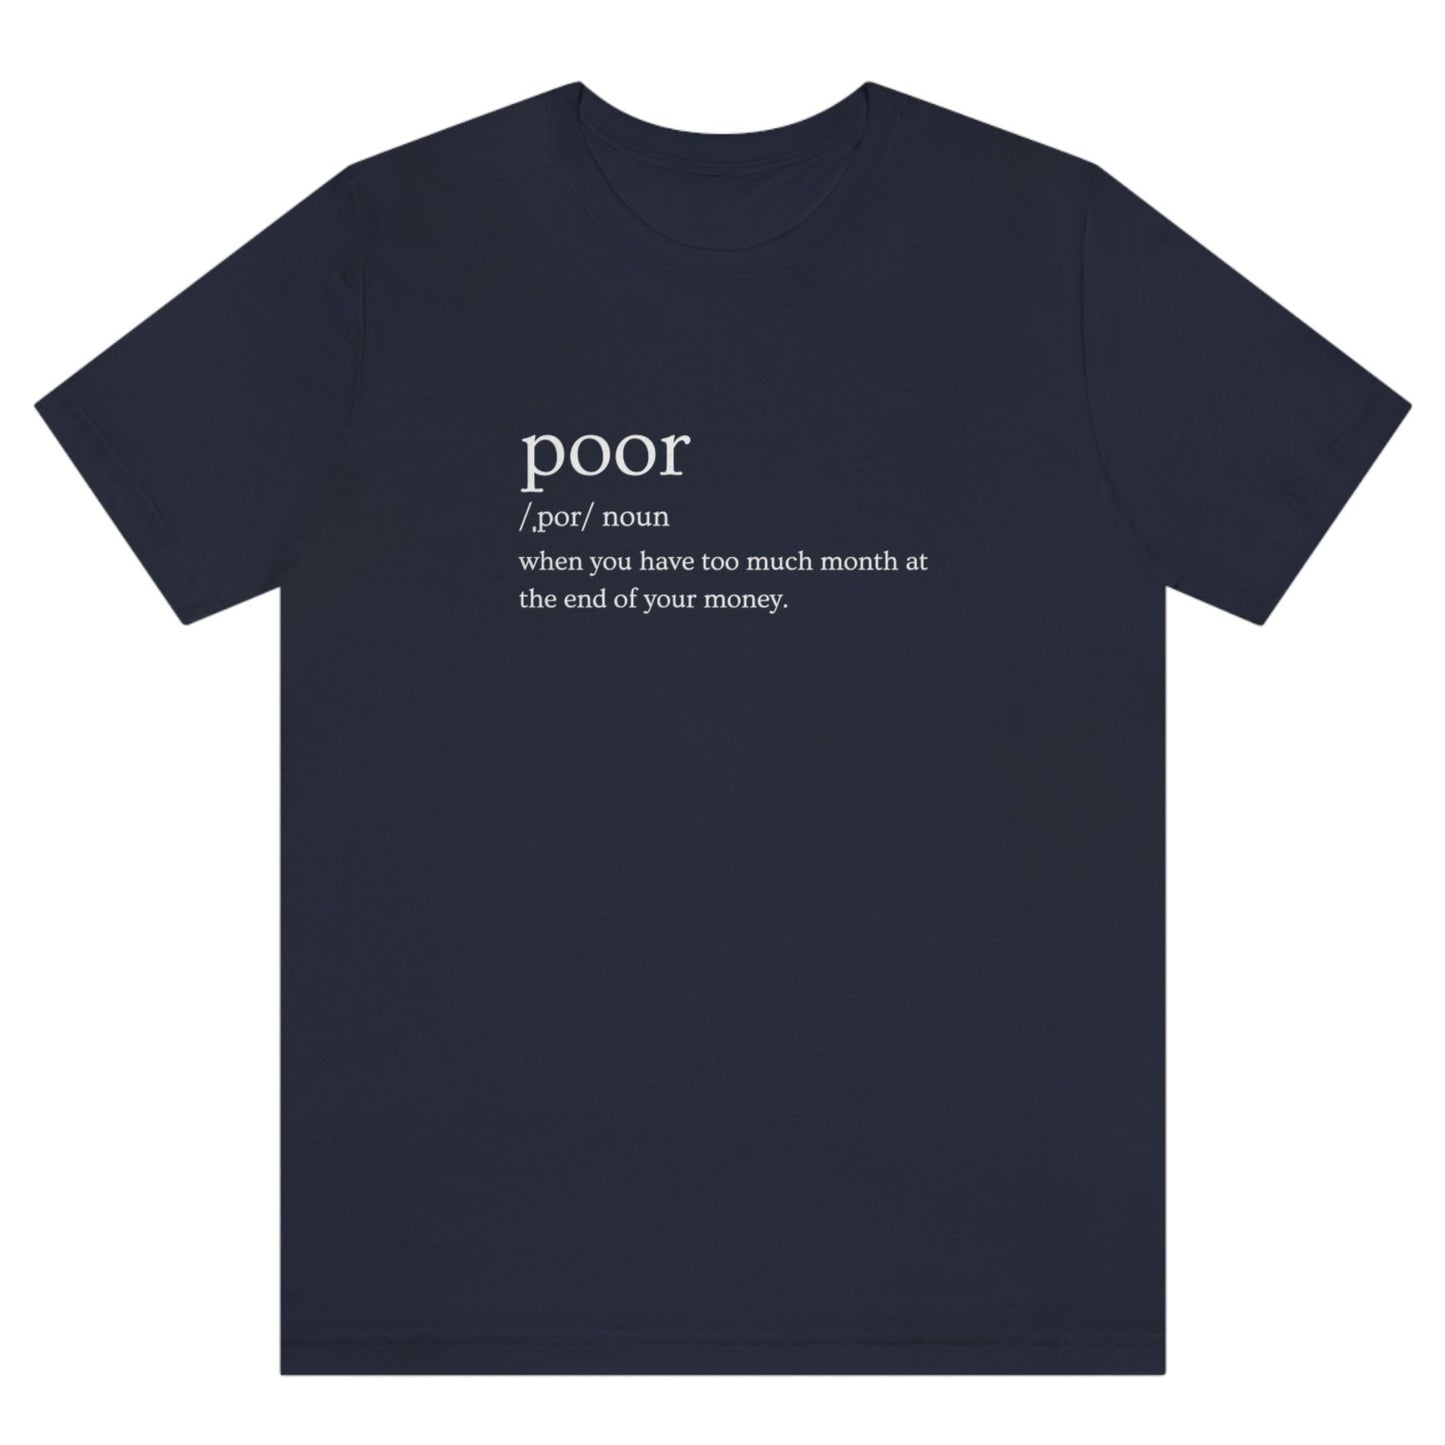 poor-when-you-have-too-much-month-at-the-end-of-your-money-navy-t-shirt